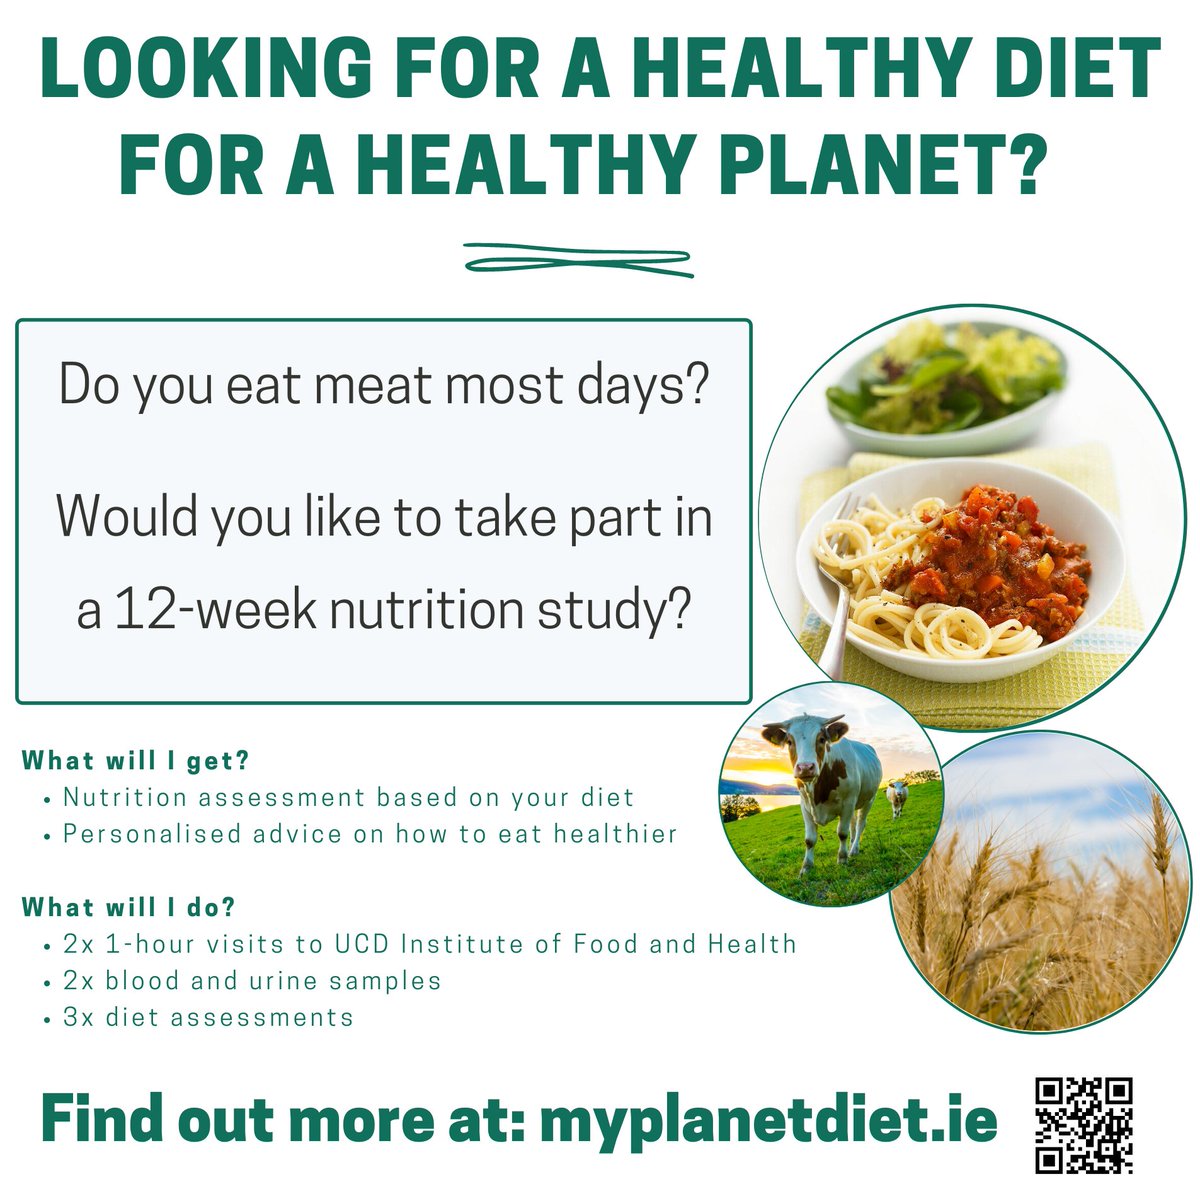 Did you know food production is the largest driver of biodiversity loss? This #BiodiversityWeek2022 let's change the way we think about food. Join the MyPlanetDiet study to find out how to make your diet better for you and better for the environment --> myplanetdiet.ie